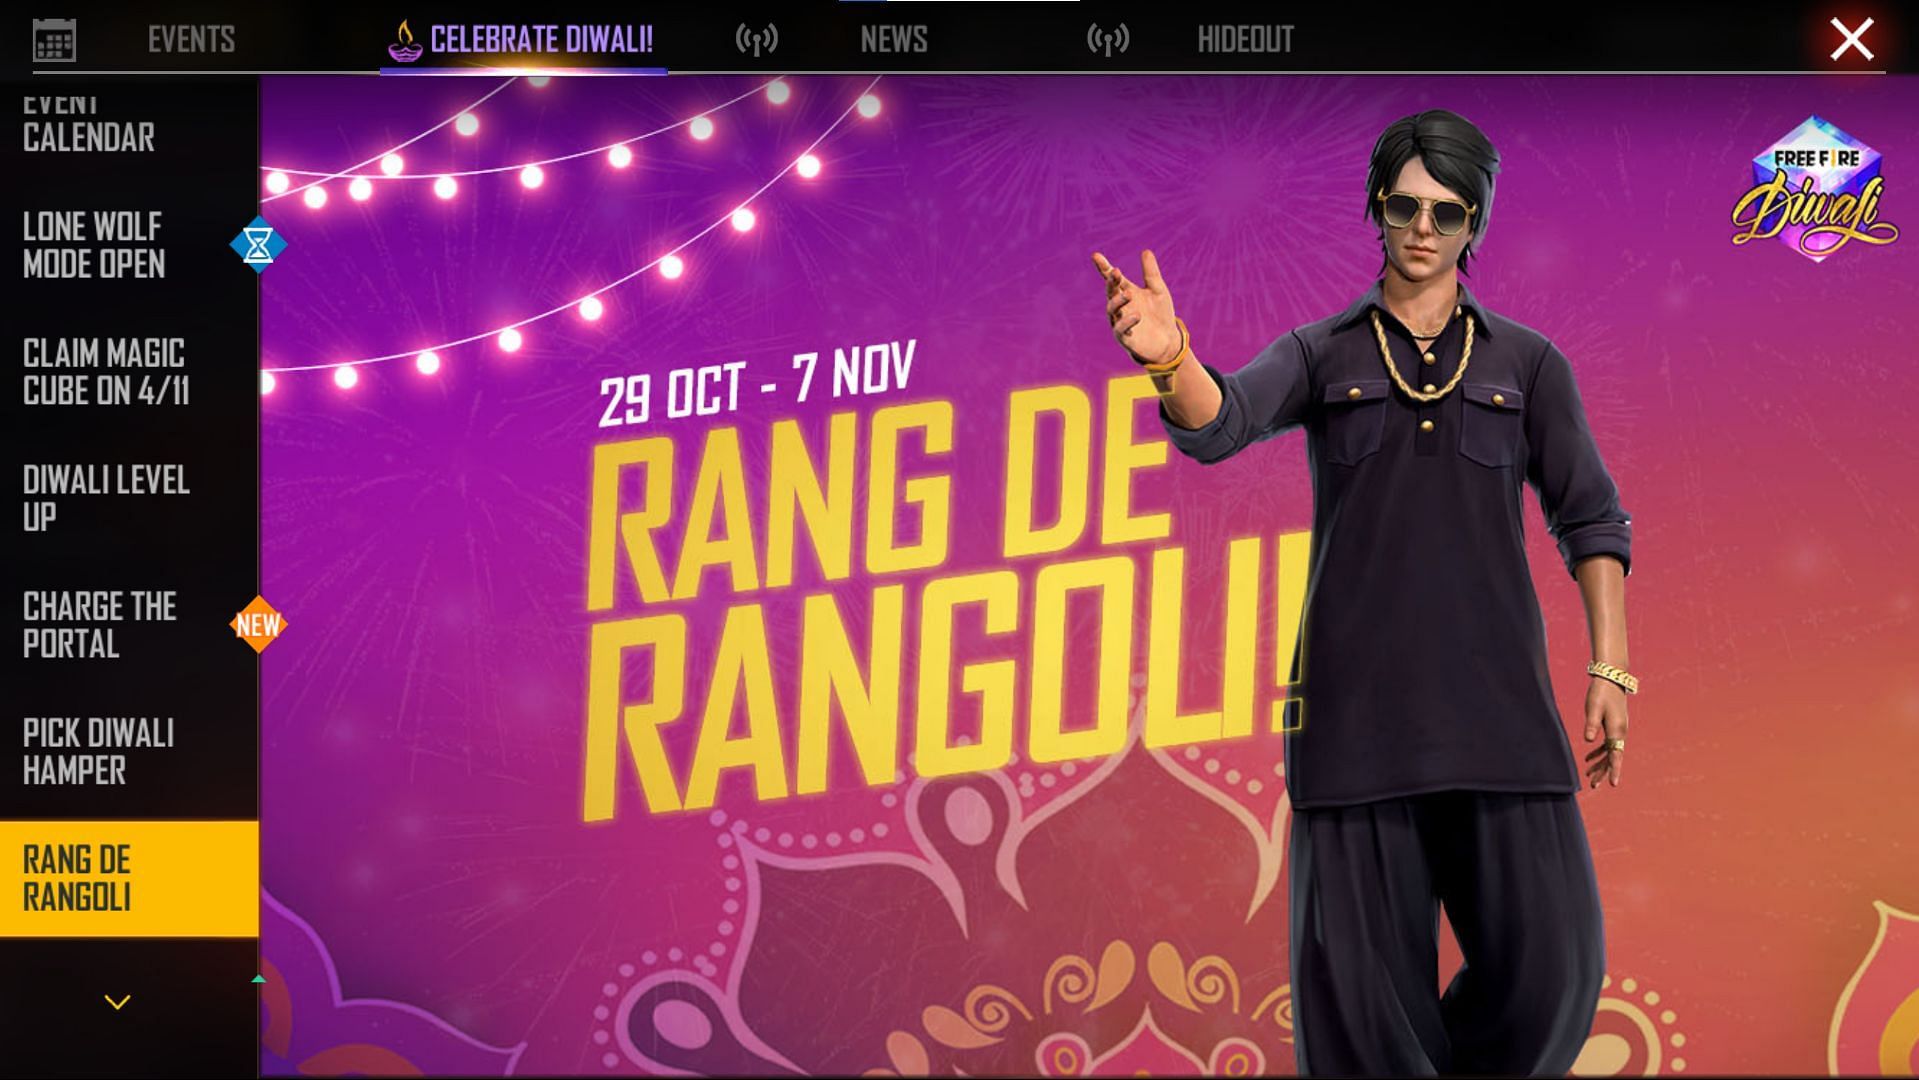 The &#039;Rang De Rangoli&#039; event is yet to start in Garena Free Fire (Image via Free Fire)